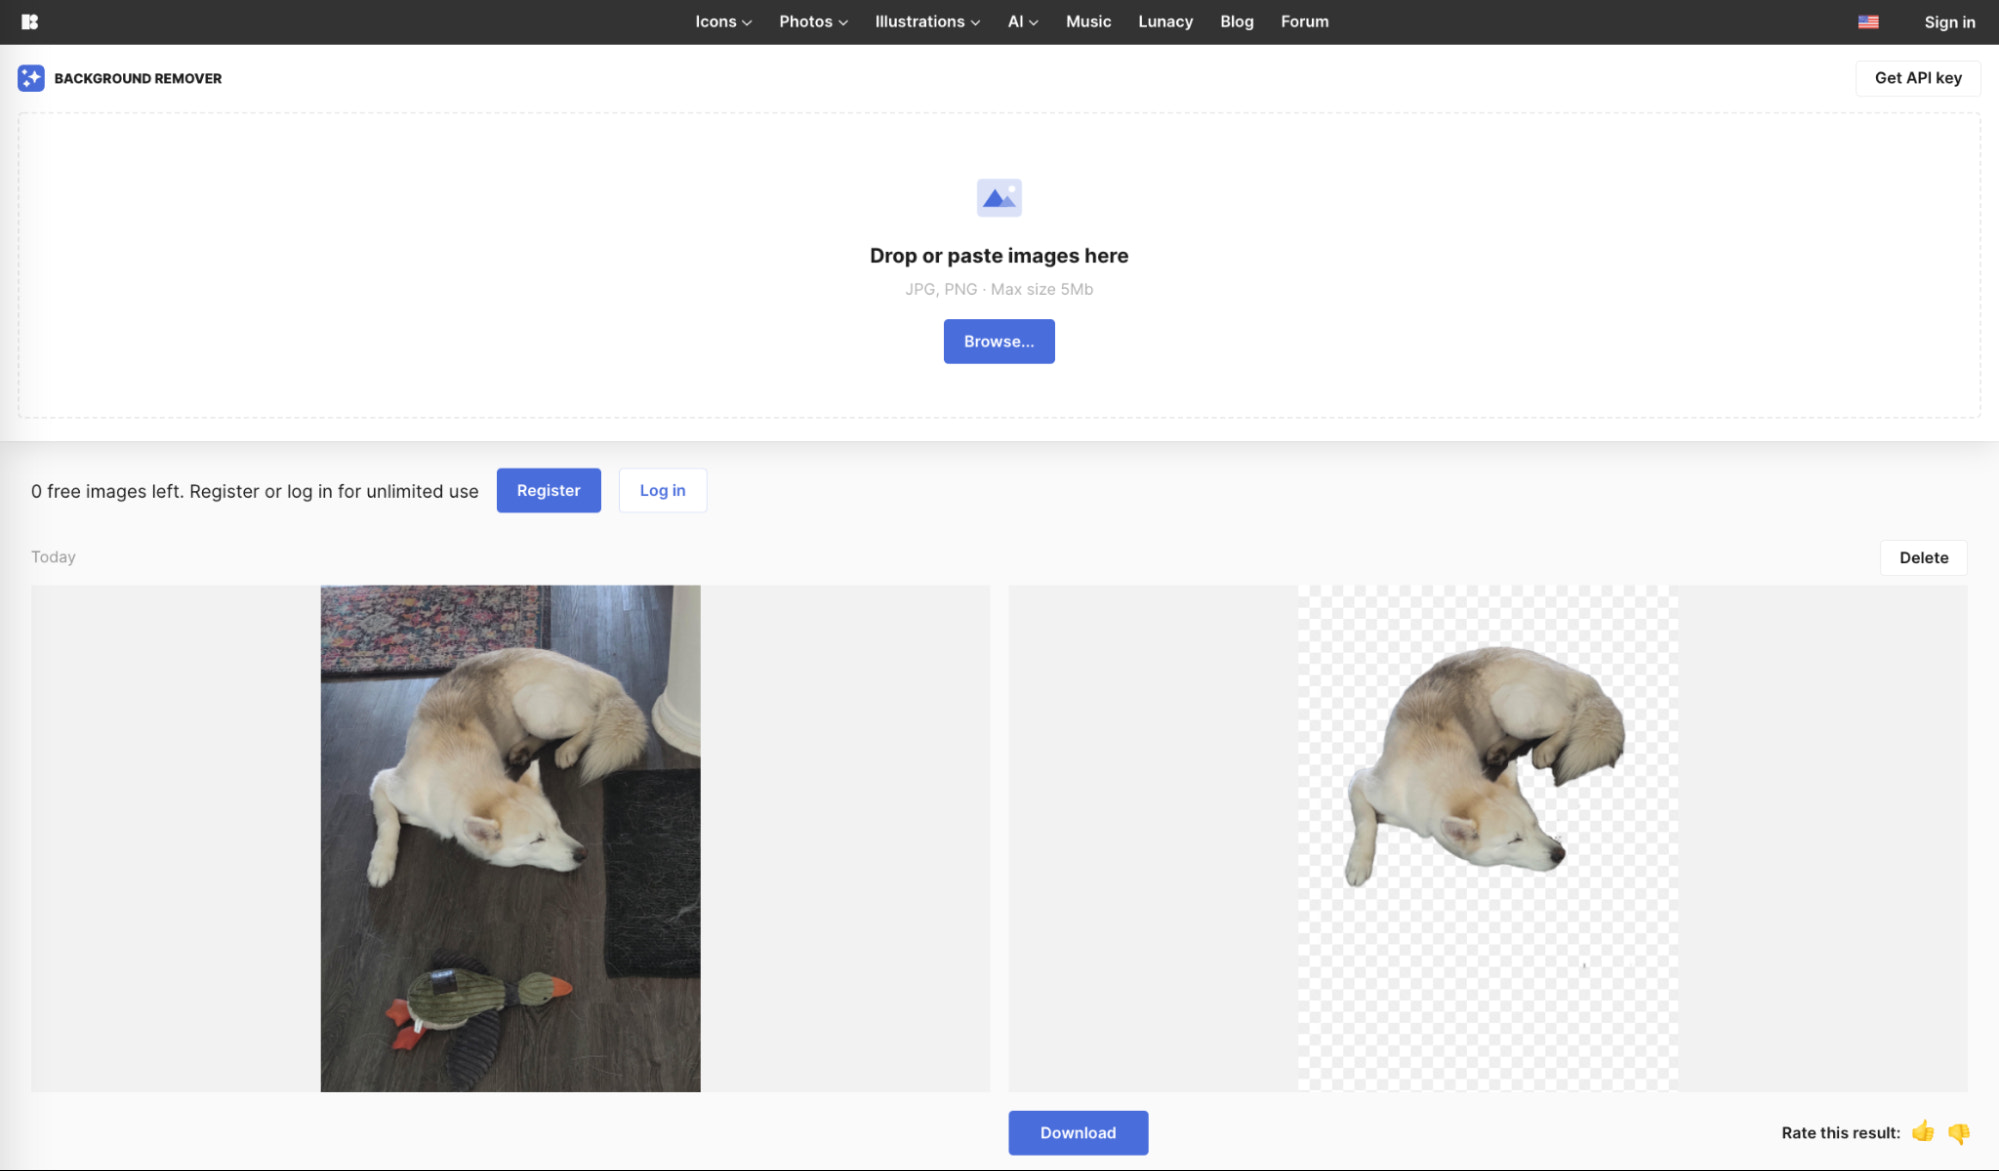 Make an Image Background Transparent - Free Online Tool